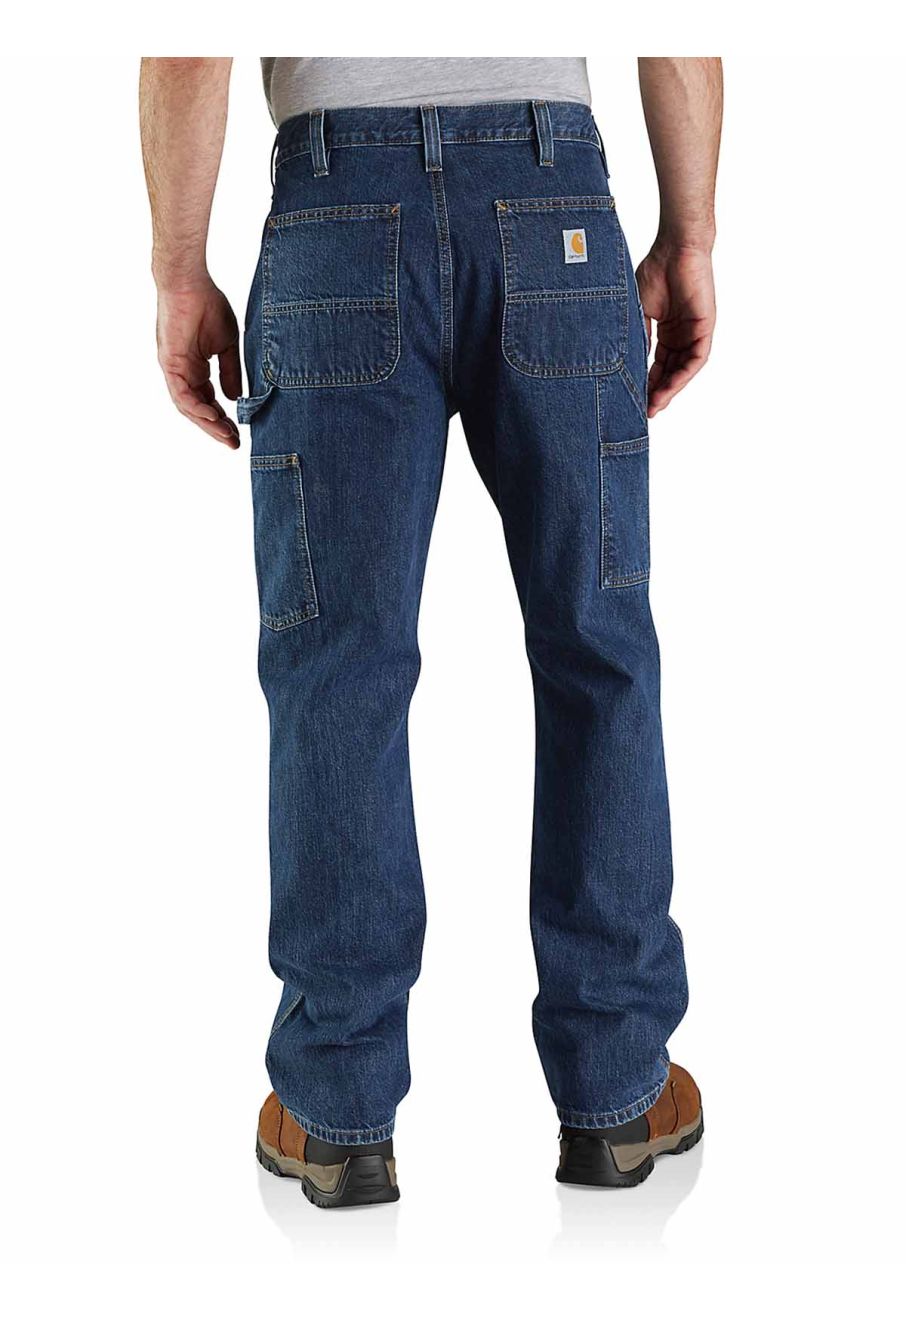 104944 Work H45 Front Canal Utility Double Carhartt Jeans